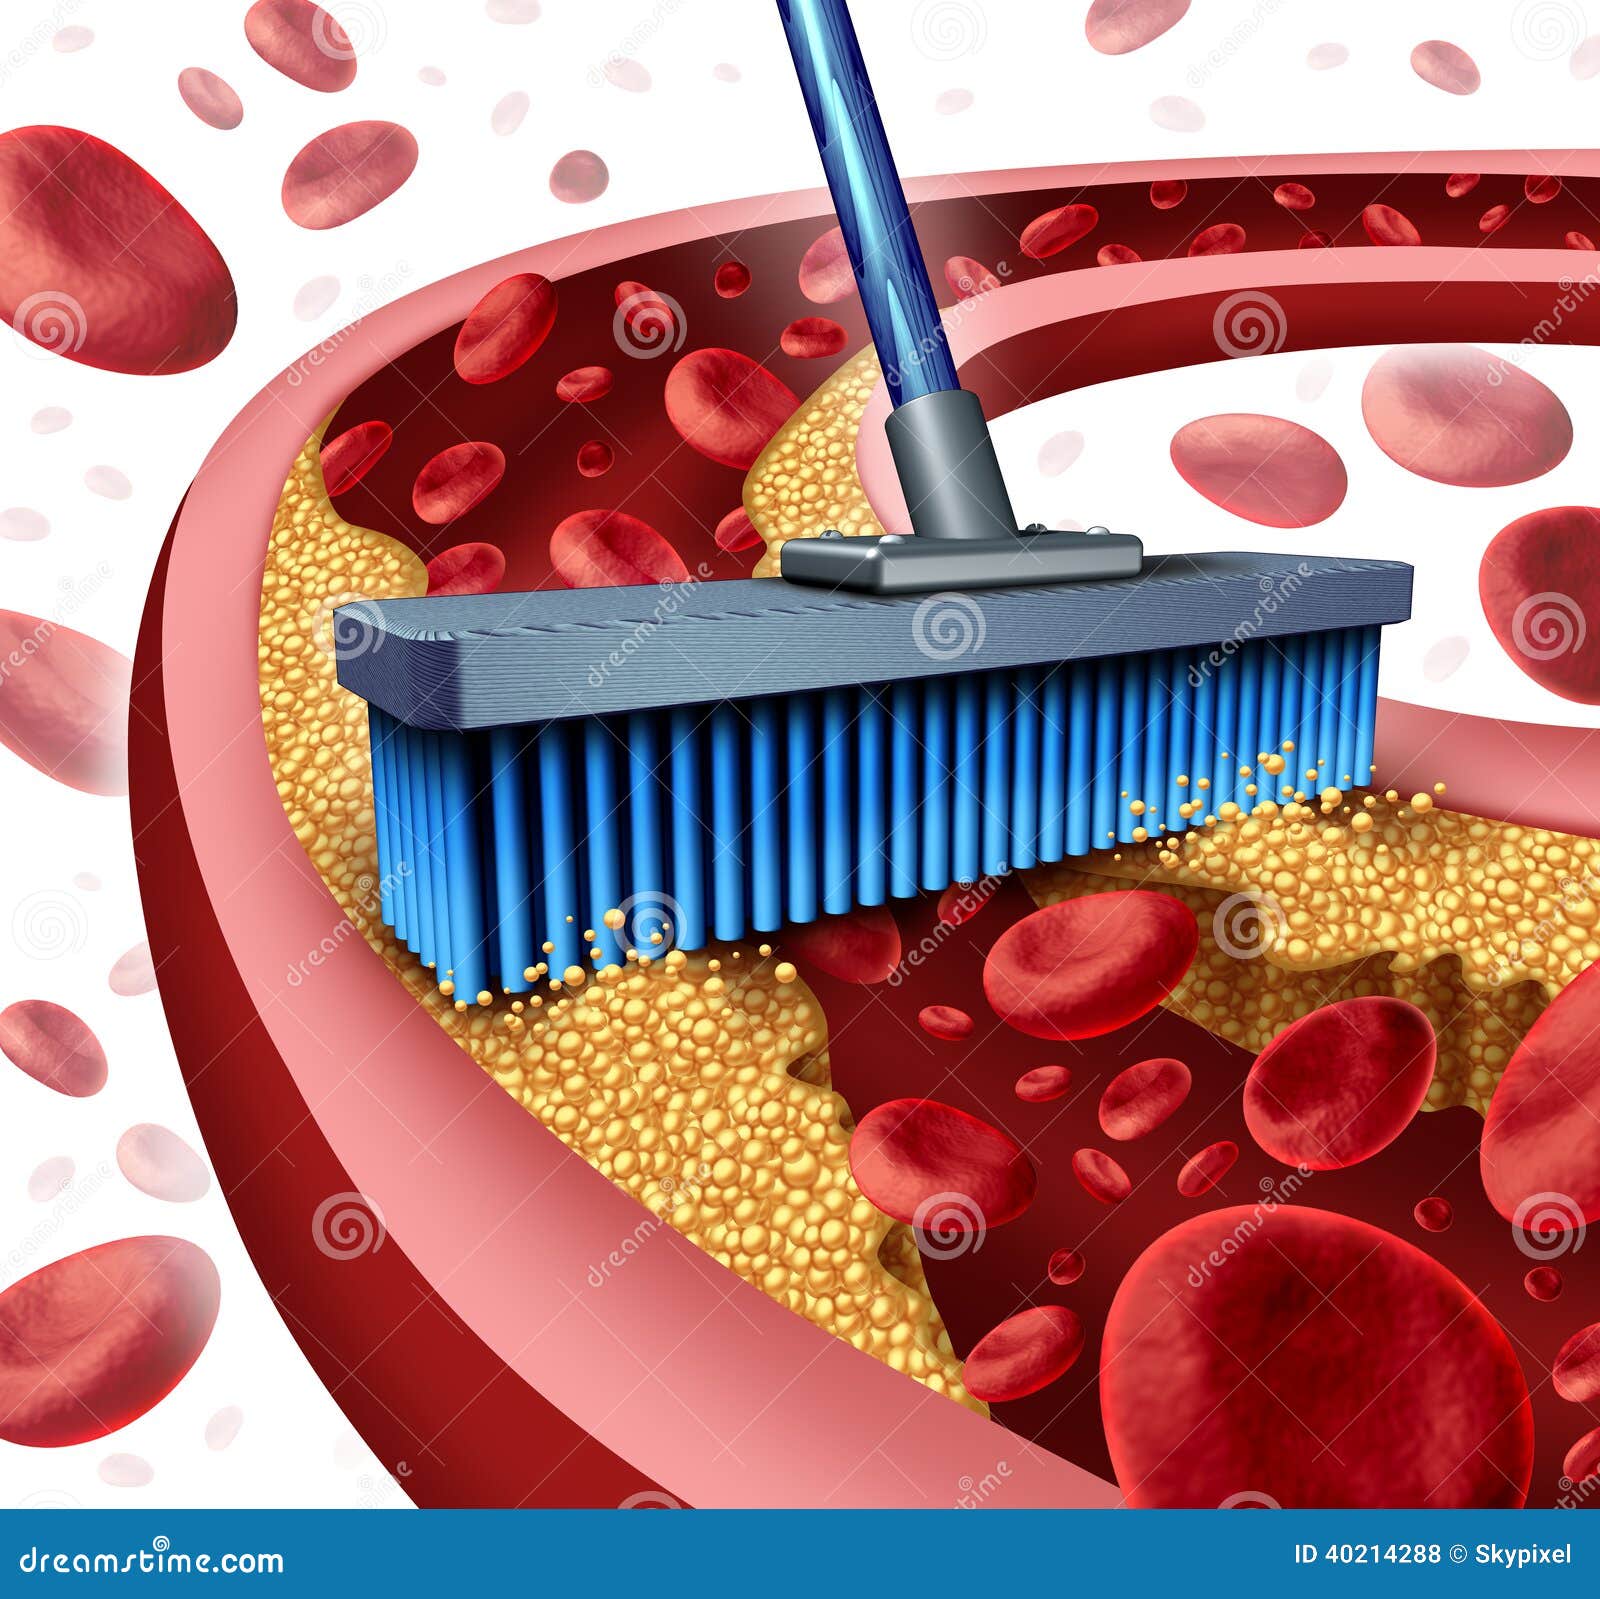 cleaning arteries